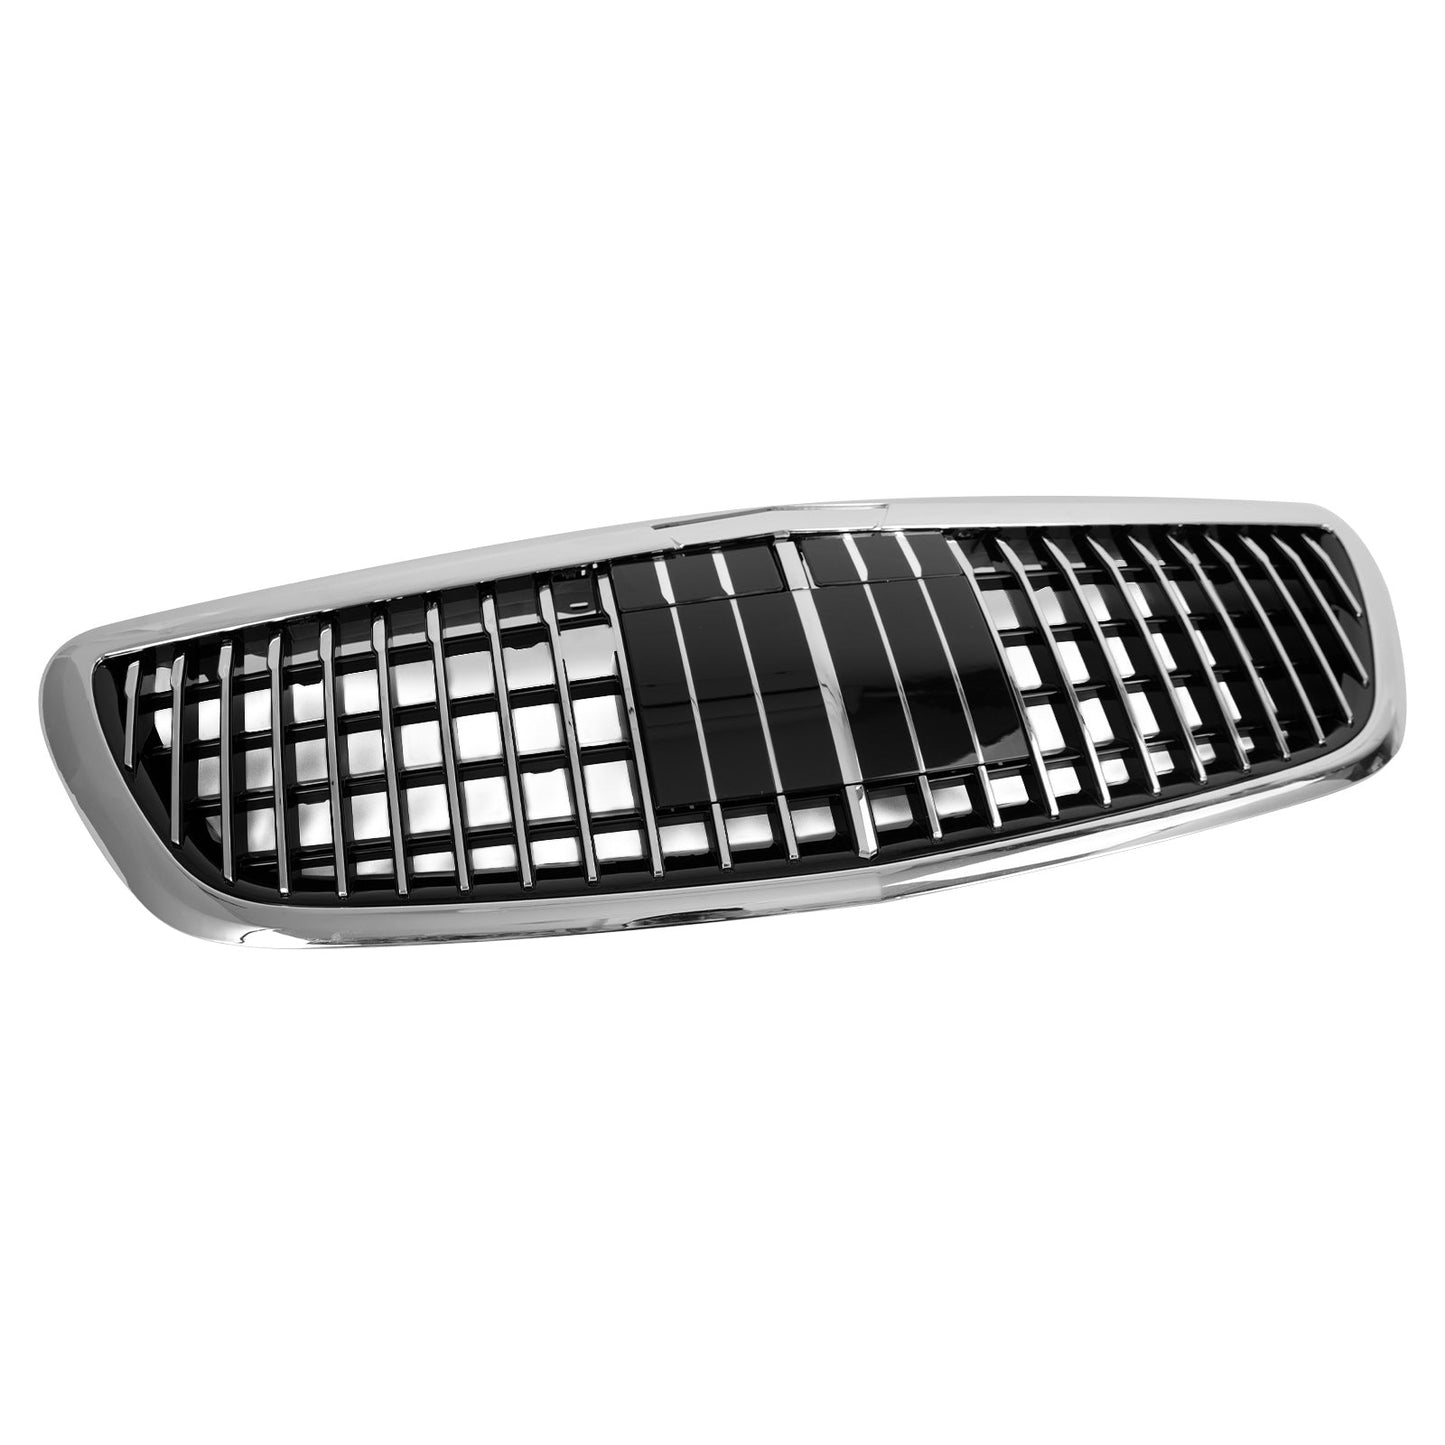 2014-2020 S680 Mercedes Benz W222 S class Maybach Style Grille with ACC